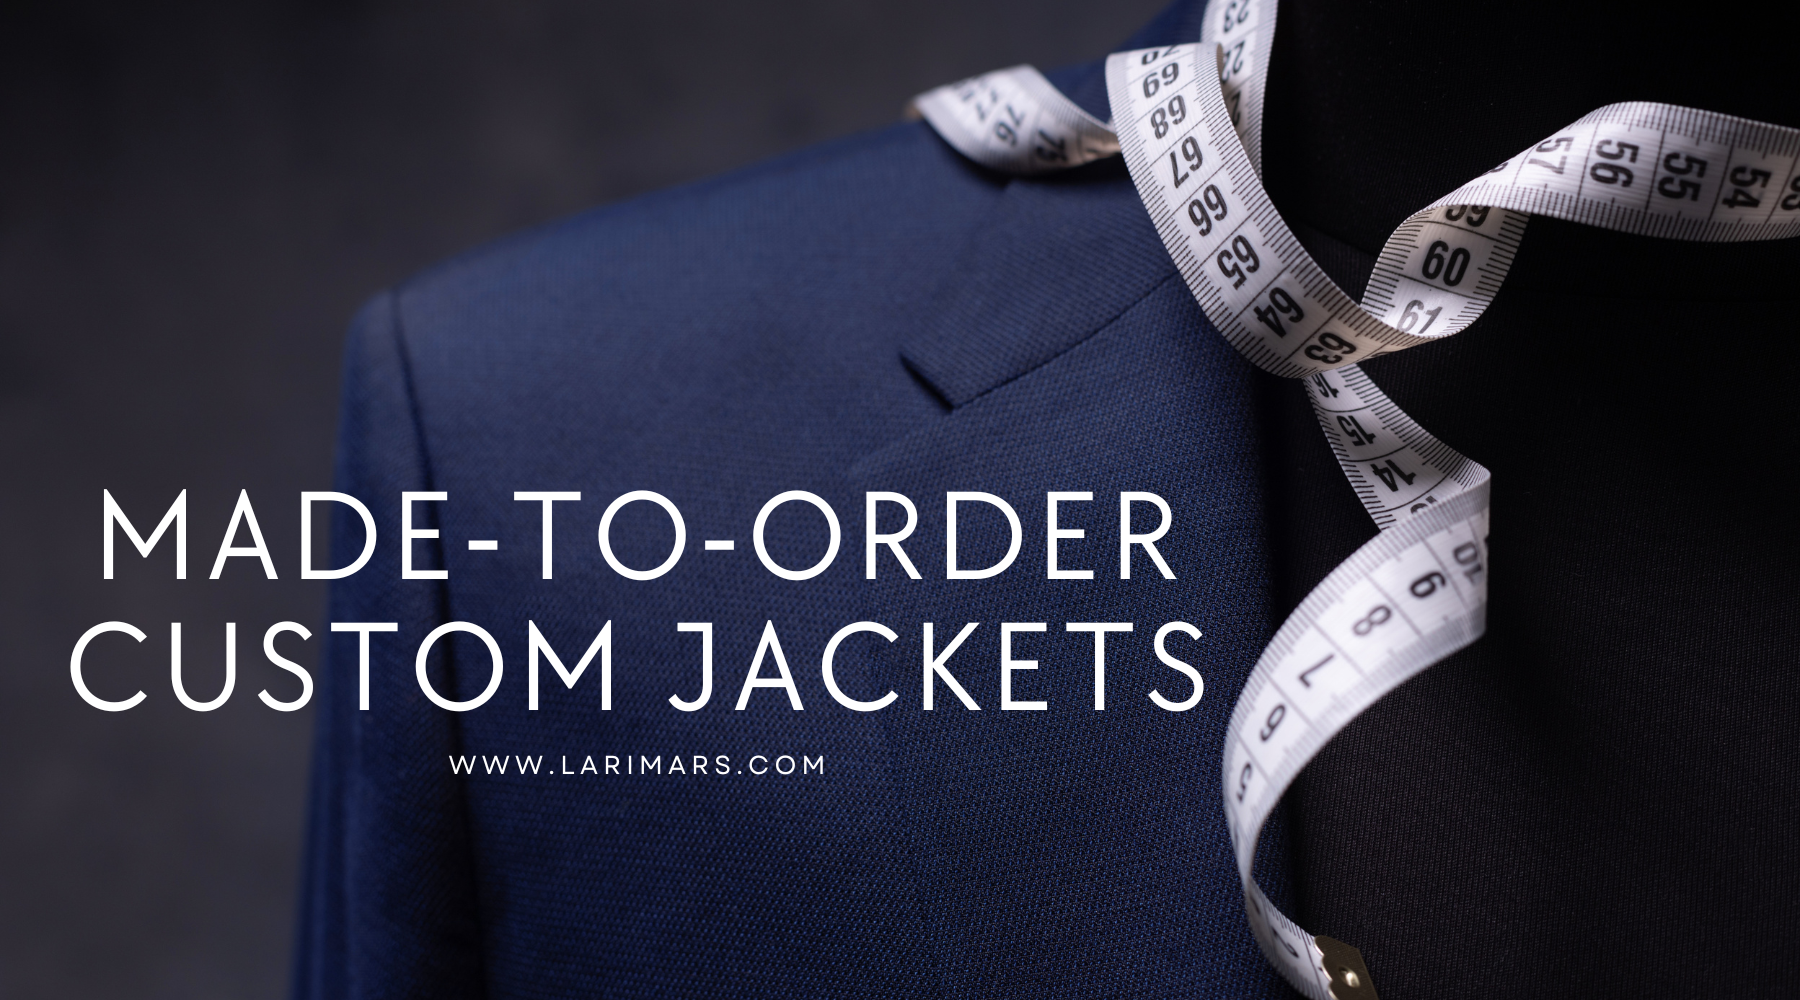 Made-to-Order Custom Jackets- Personalization, Cost, and Care Guide